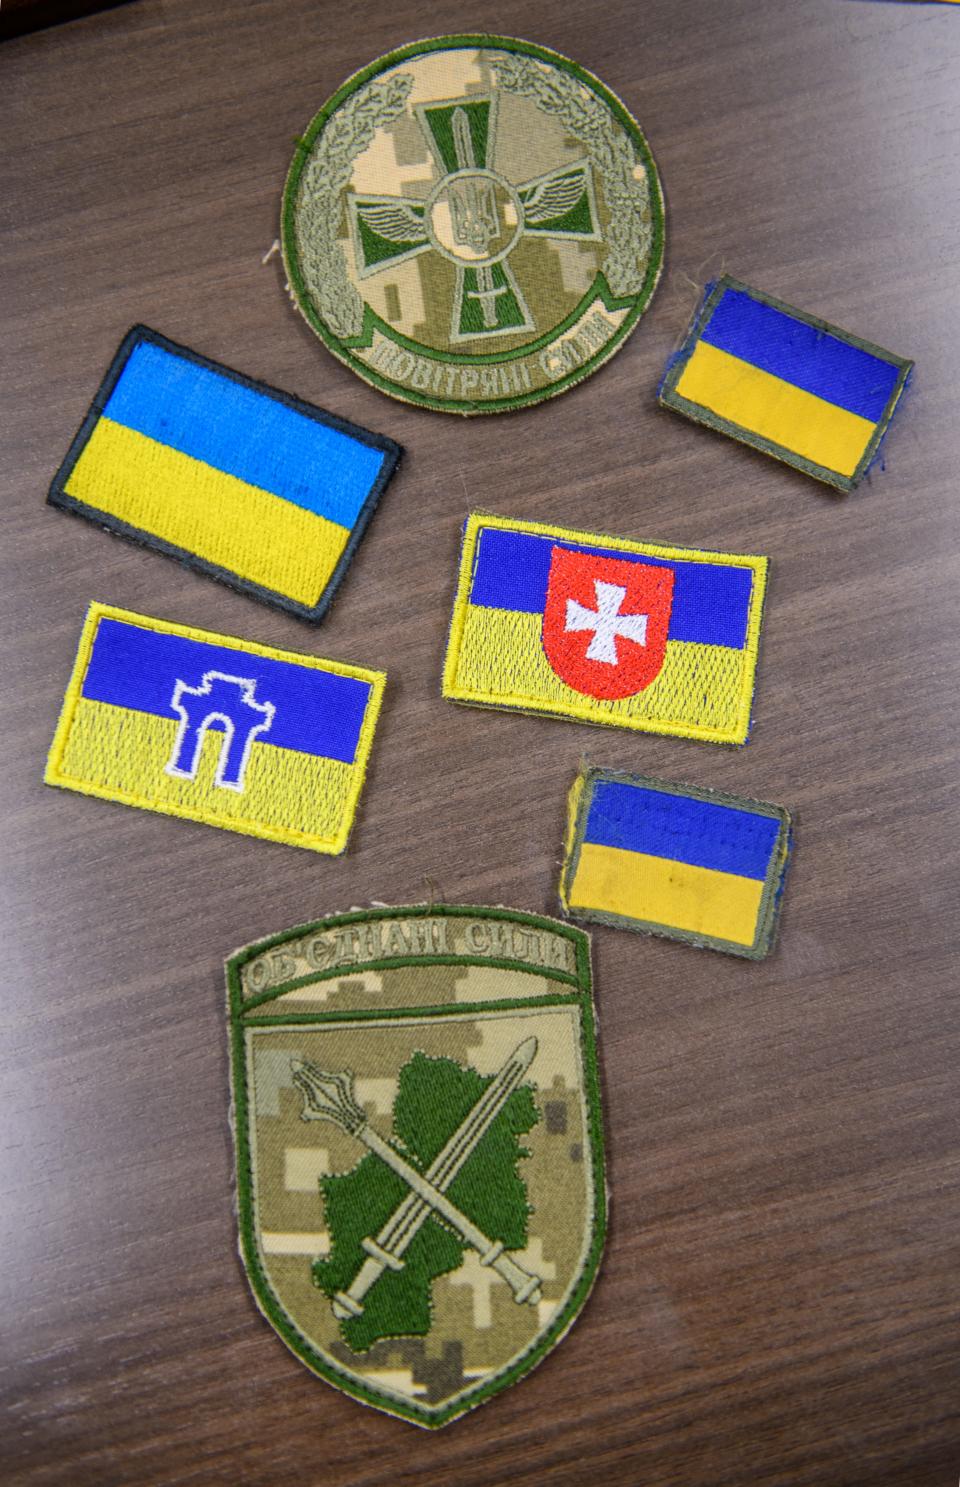 A set of patches worn by first responders in Ukraine.